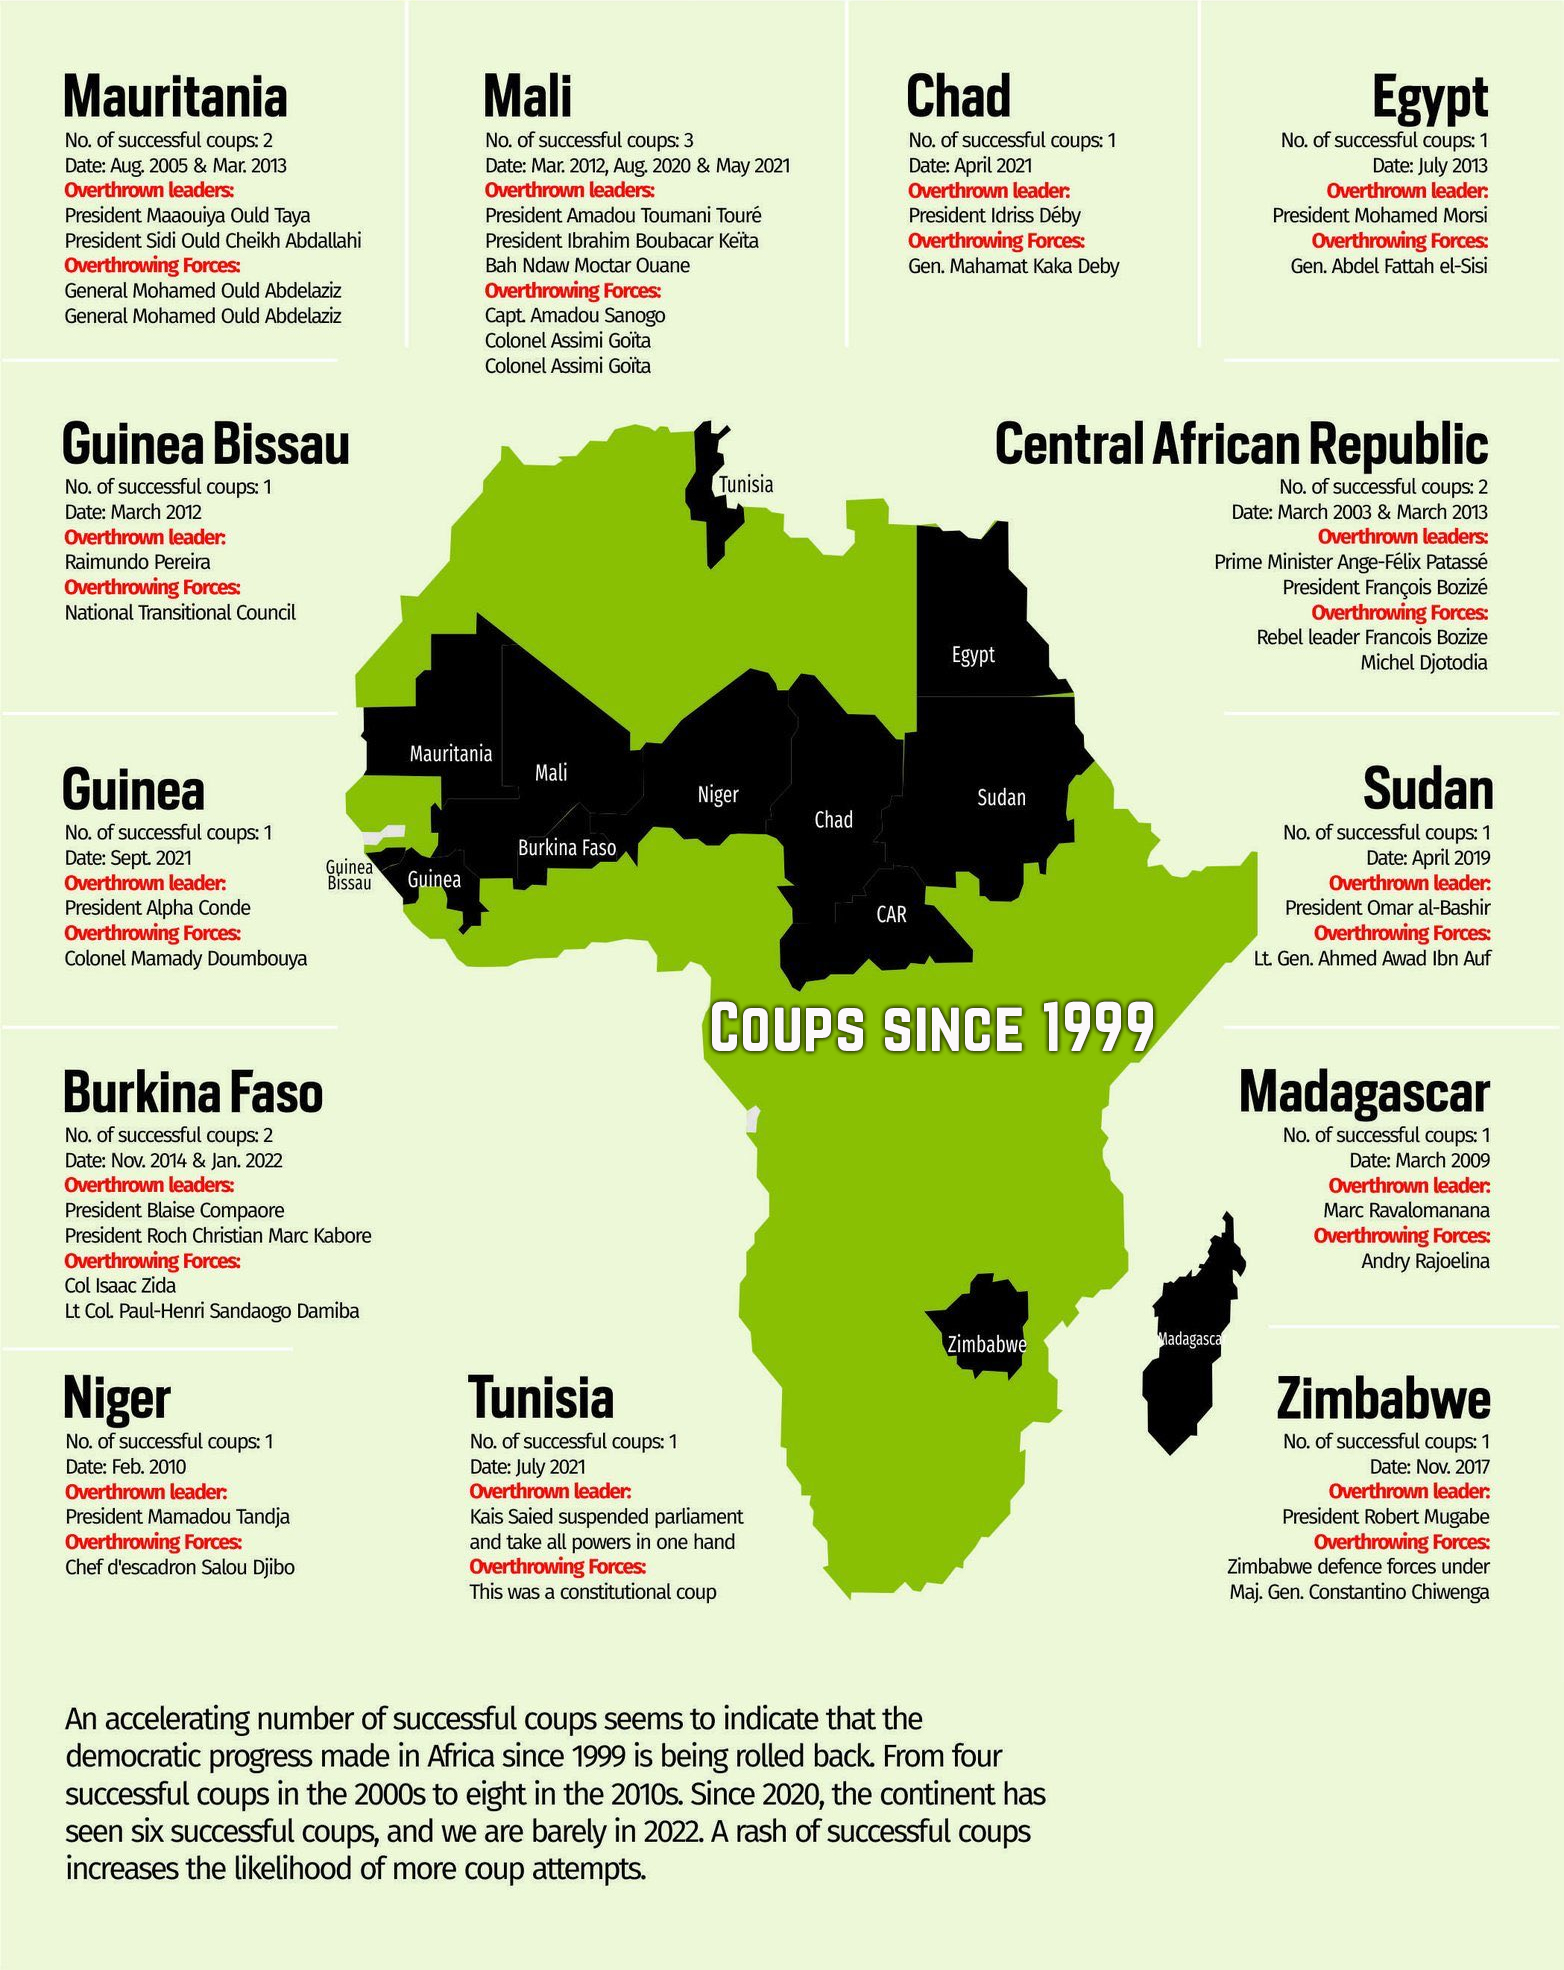 Coup belt in Africa: